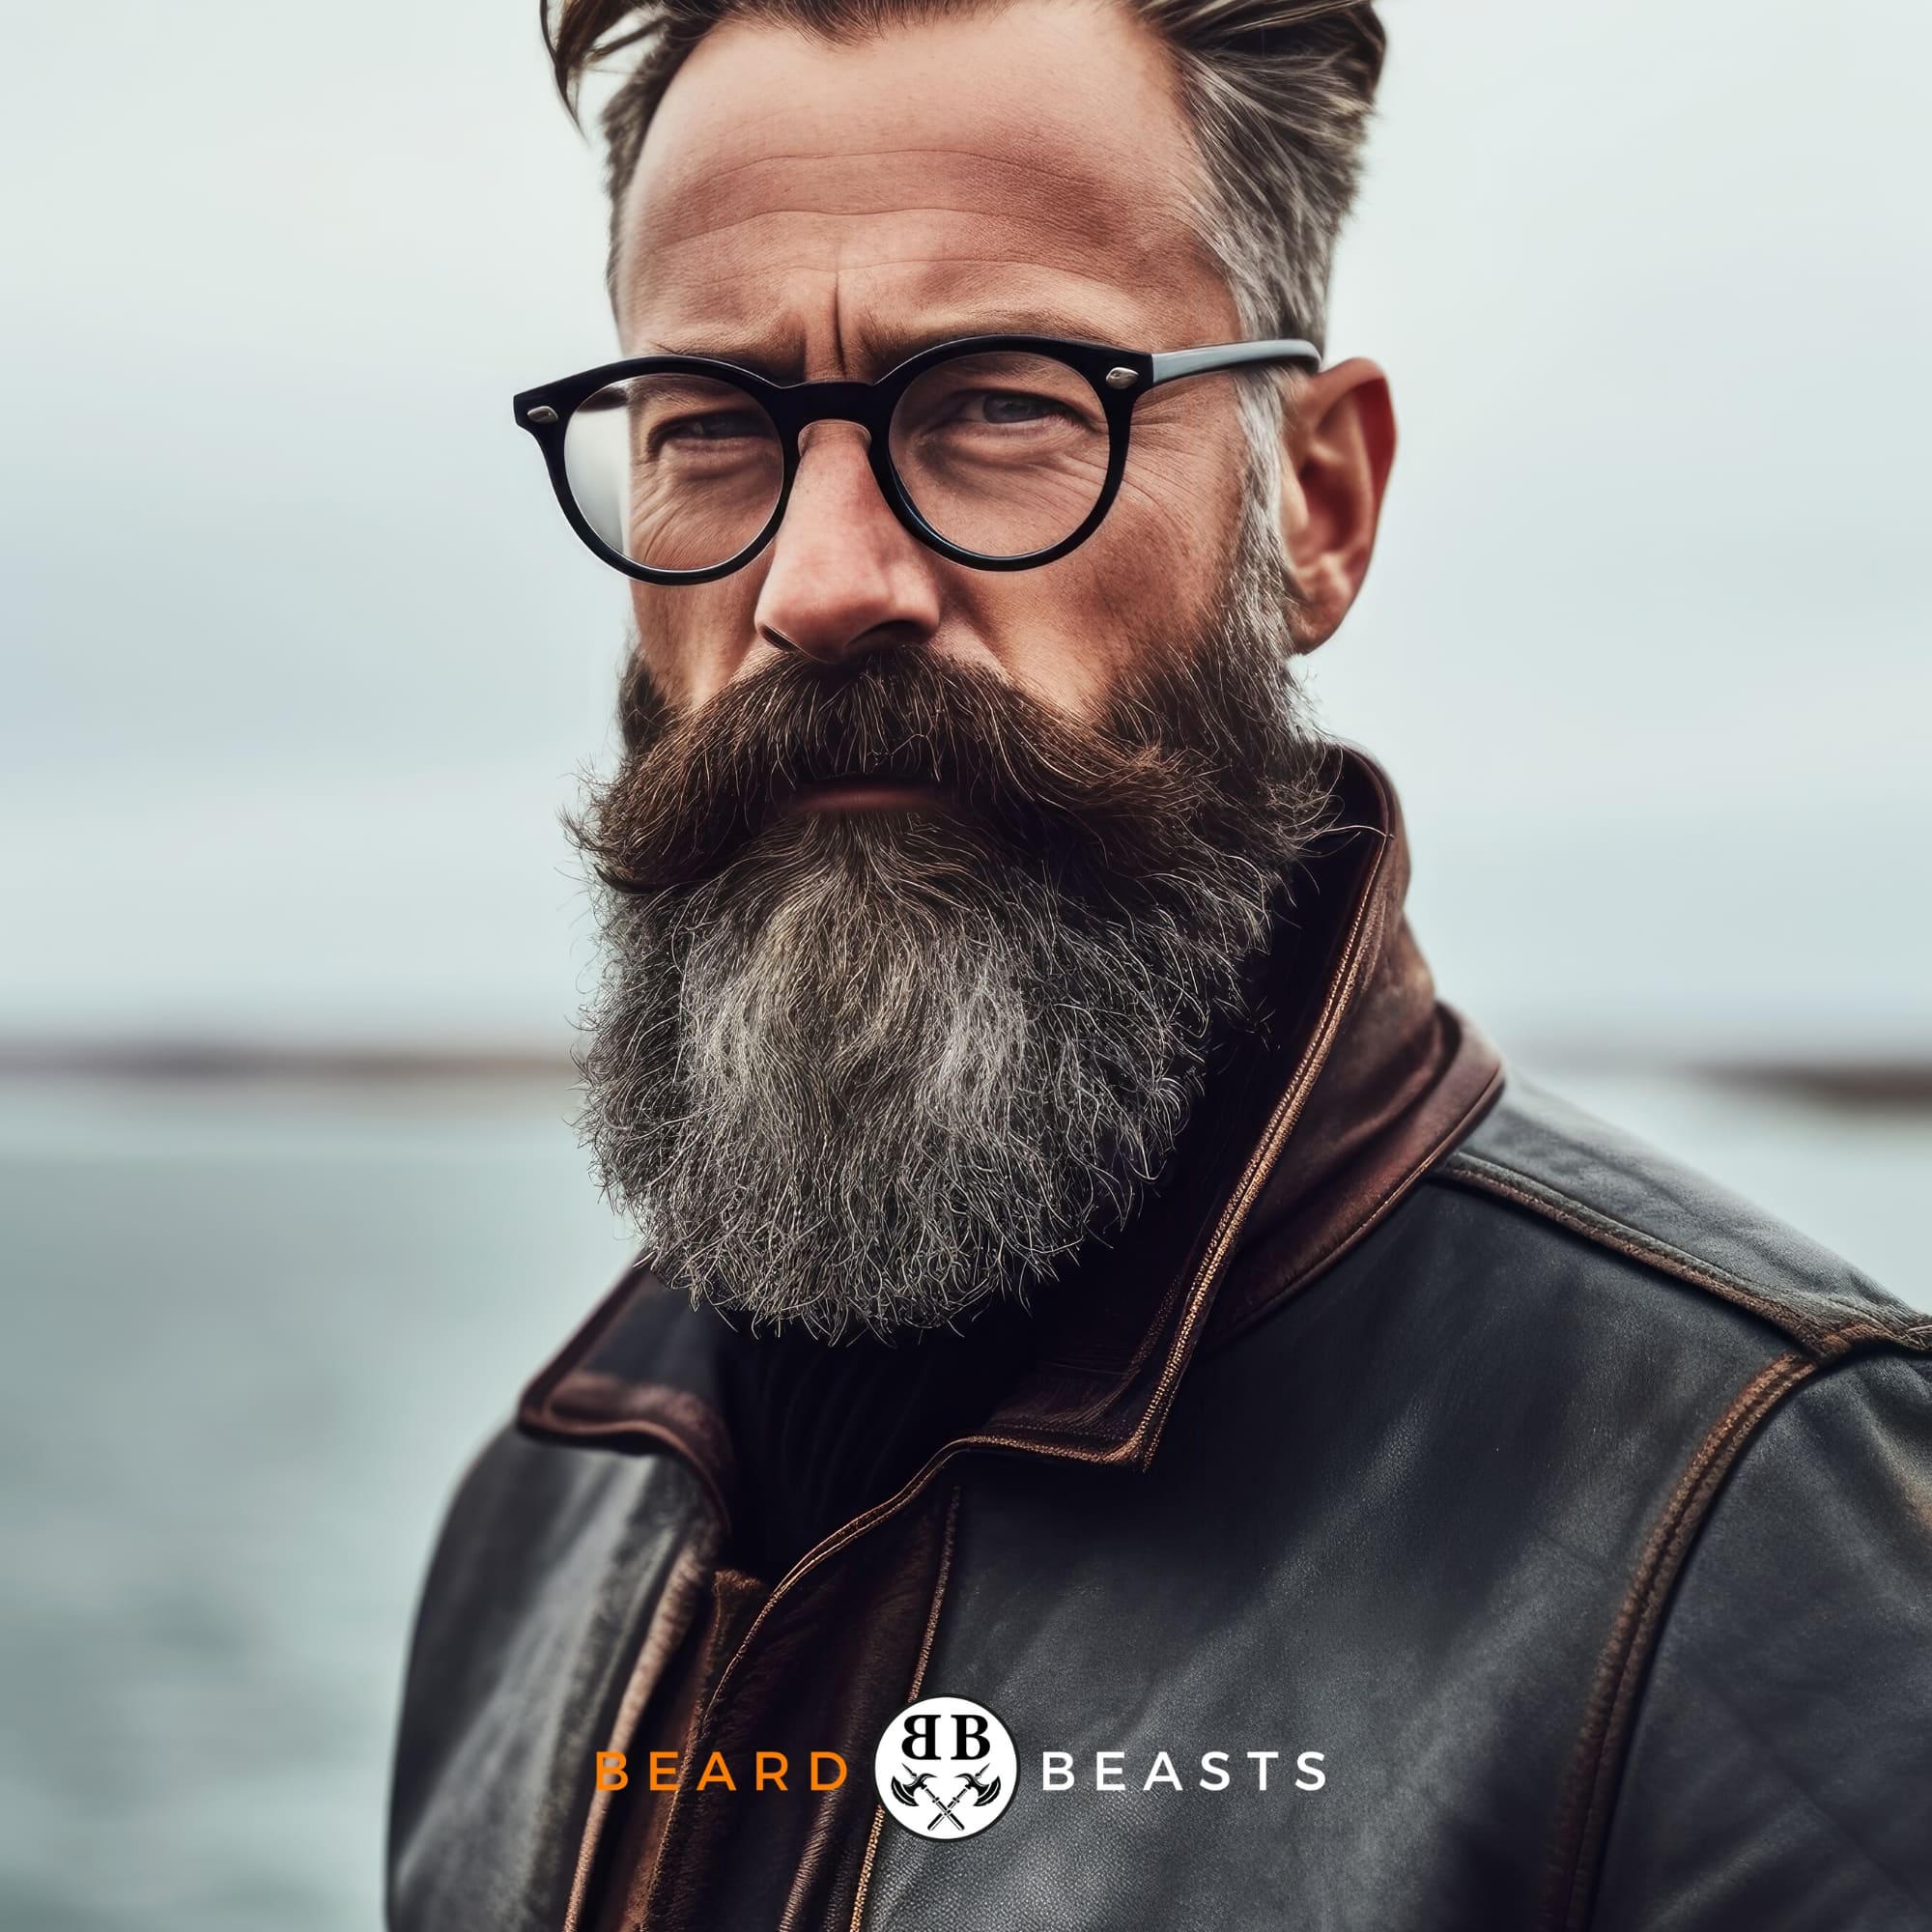 Most Popular Hairstyles for an Old Man with a Beard